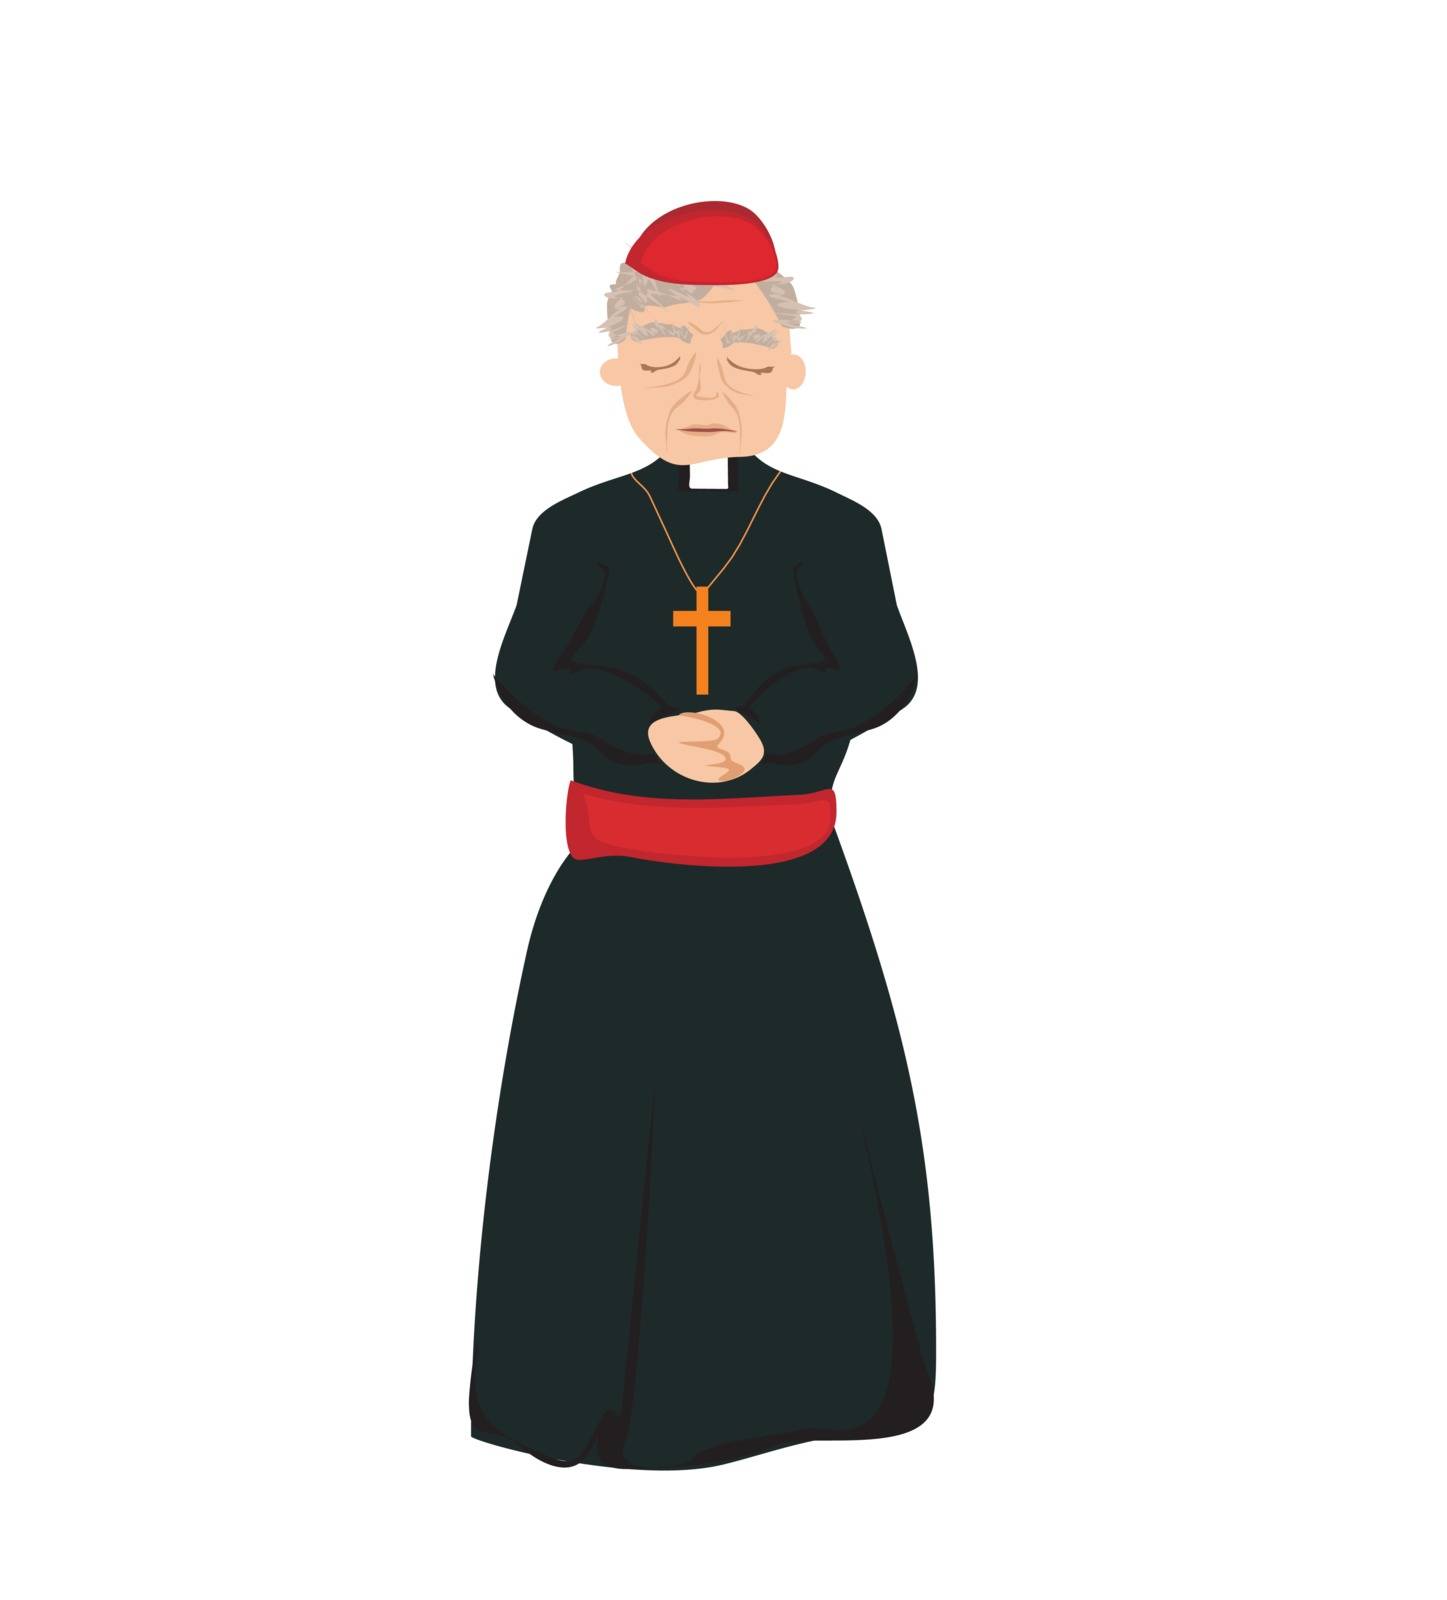 Catholic priest on a white background, vector by JackyBrown